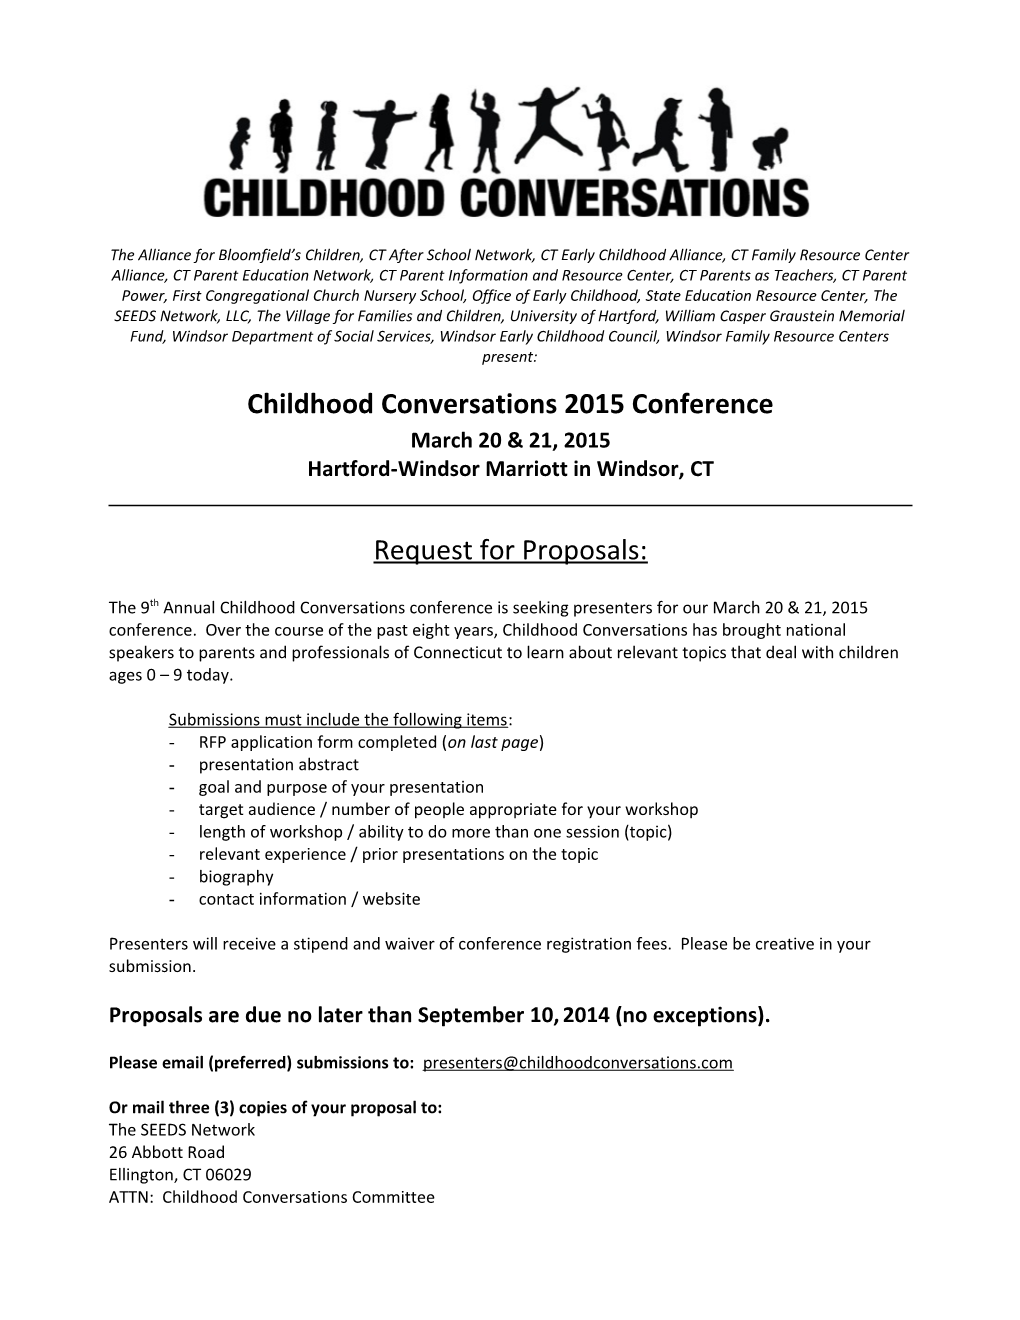 Childhood Conversations 2015 Conference